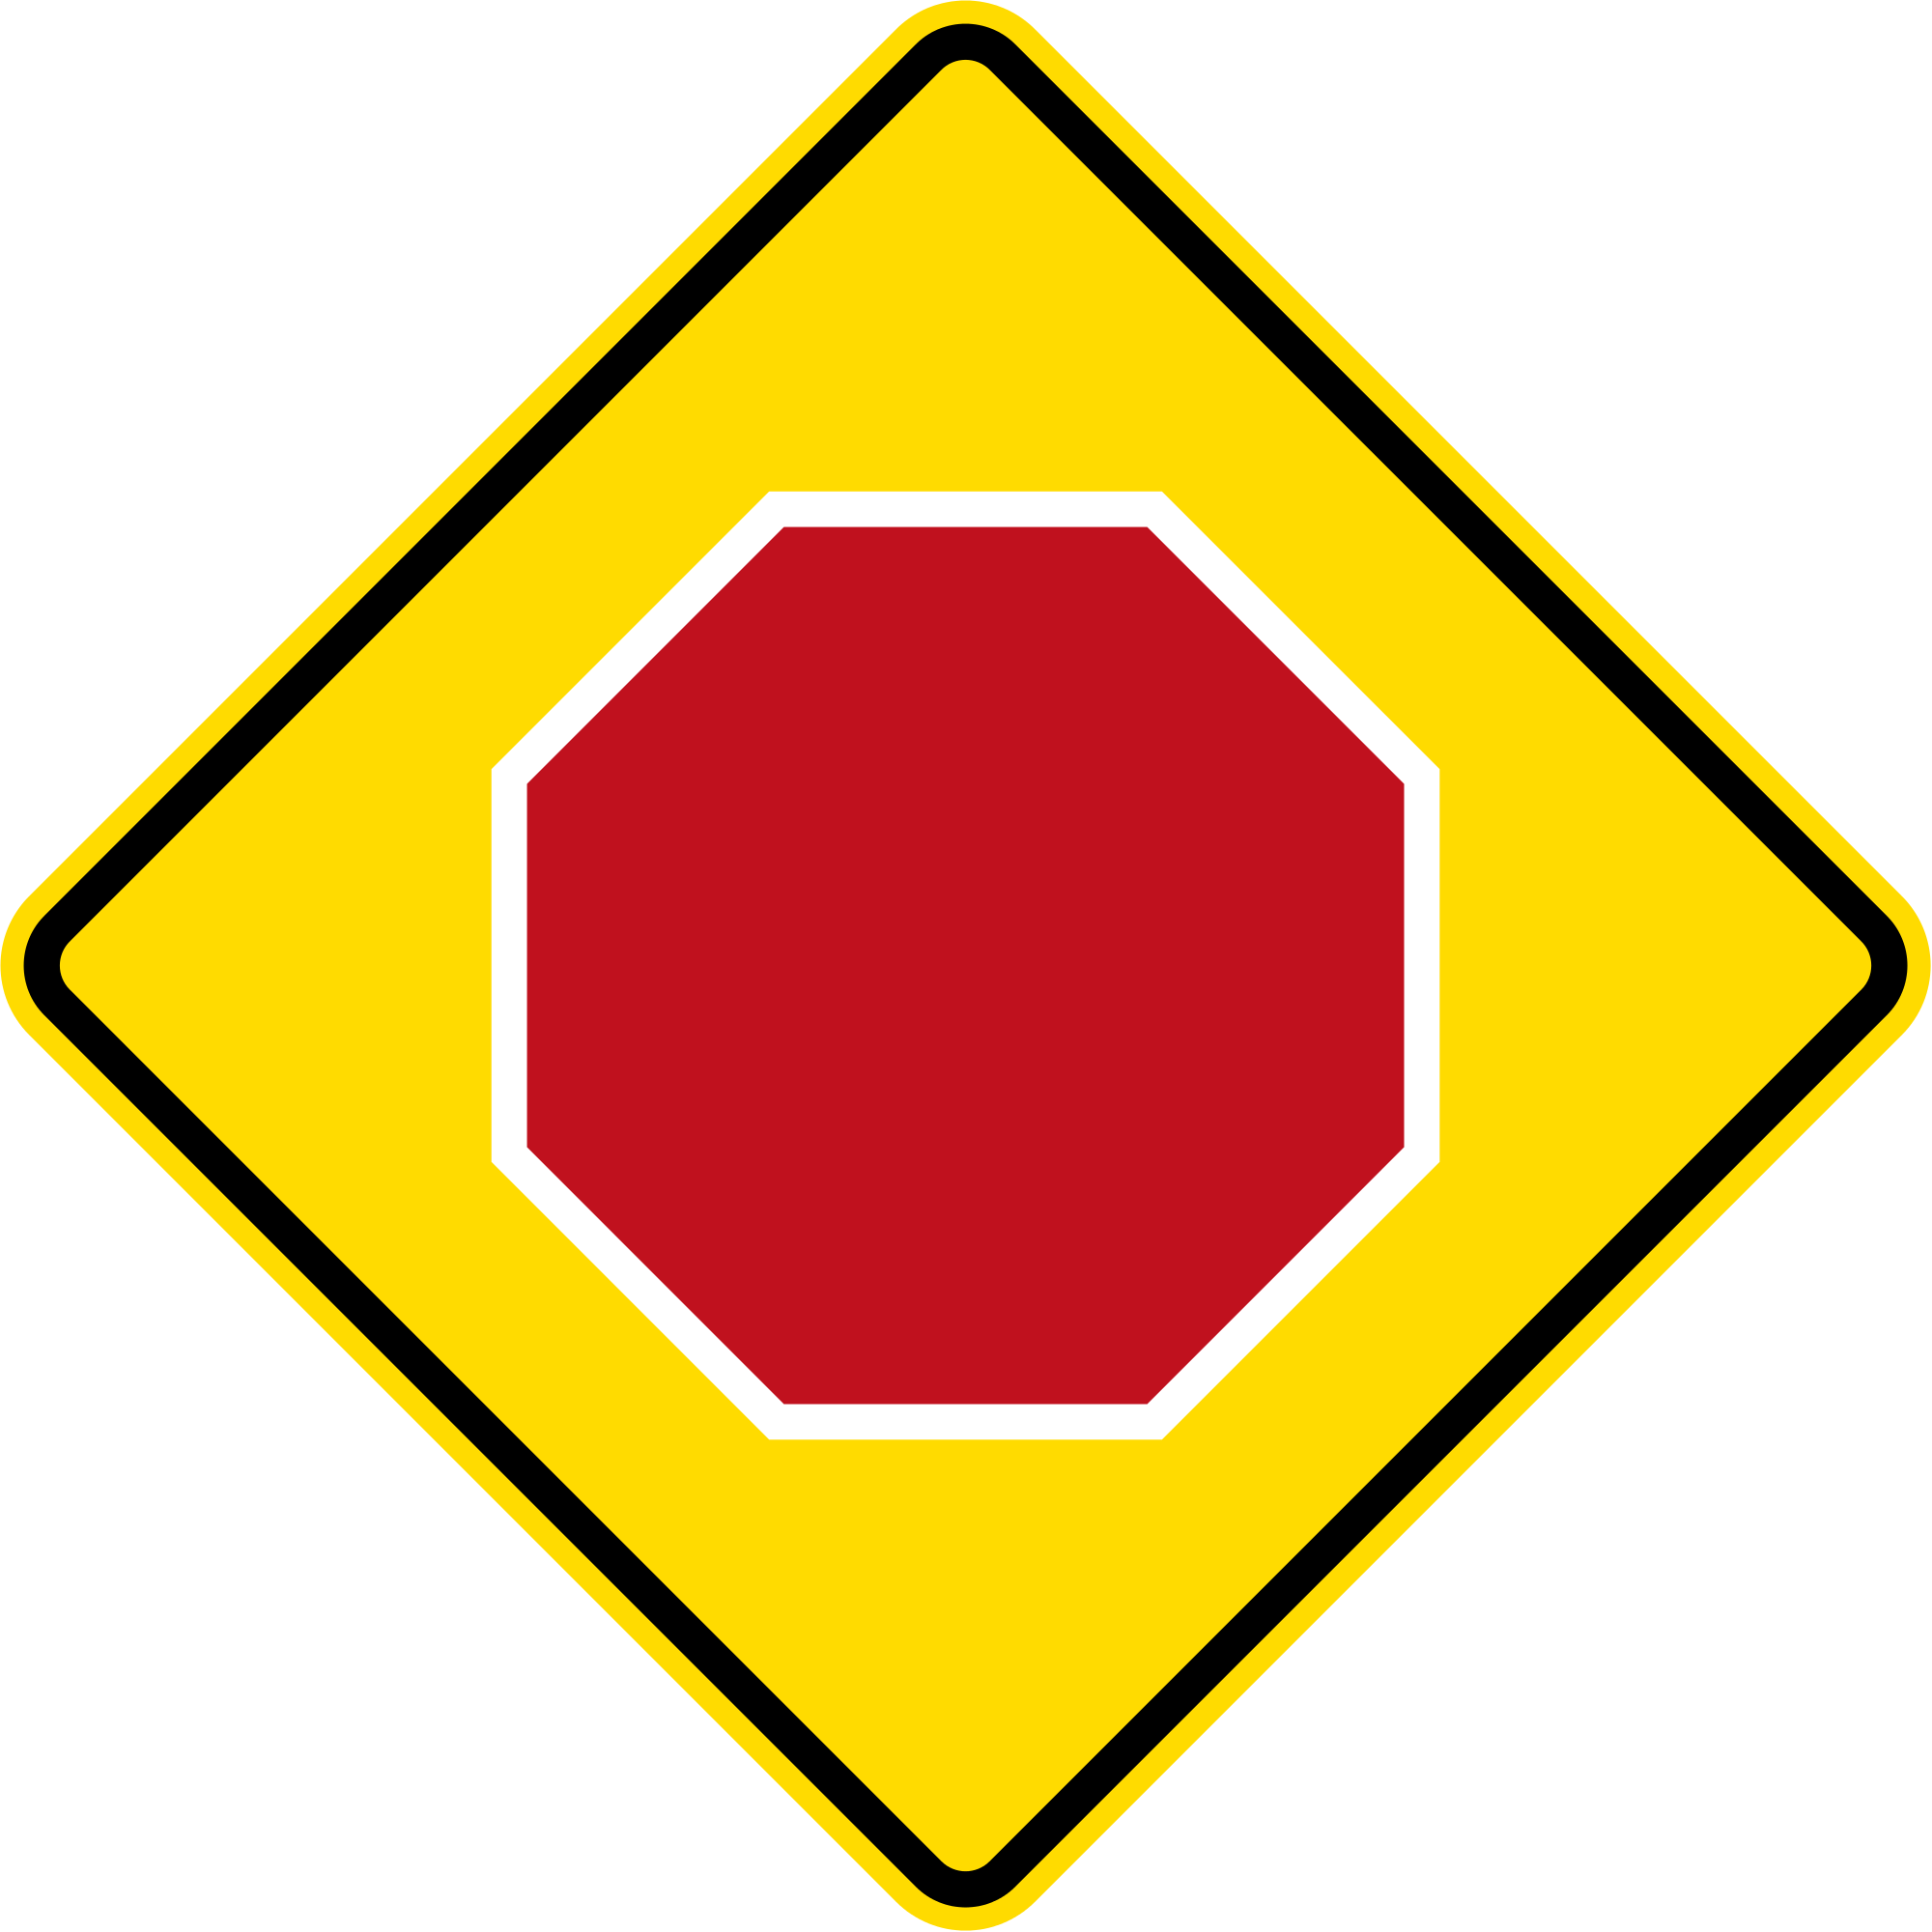 Open - Round About Ahead Sign (2000x2000)